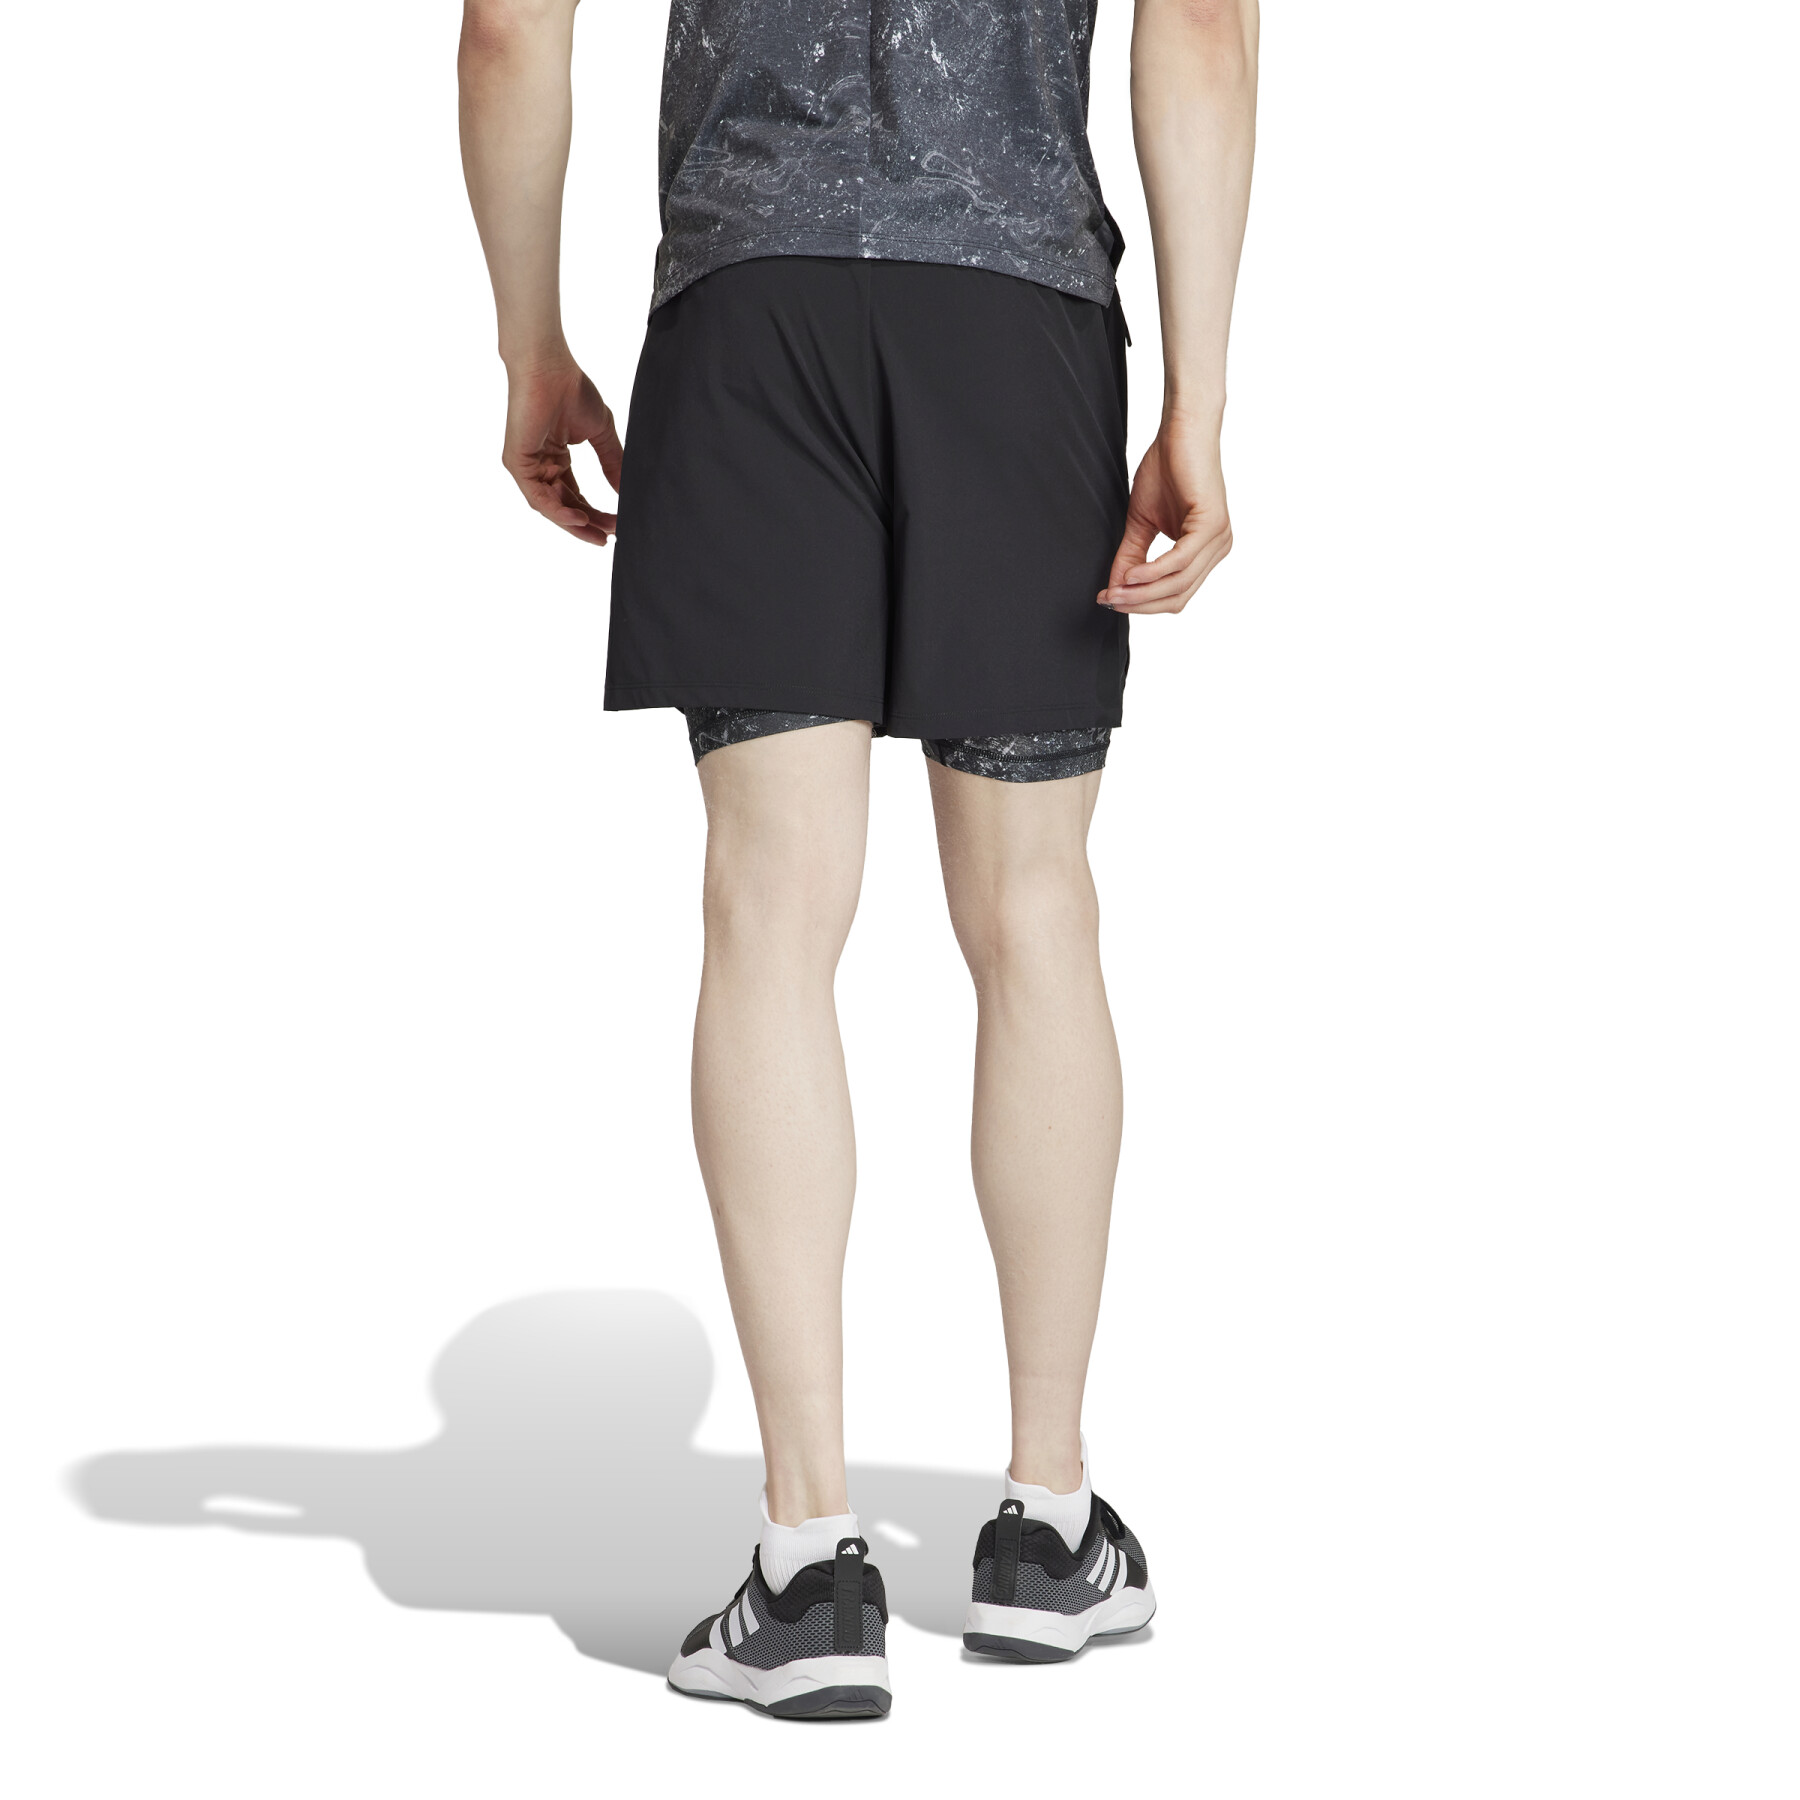 2 in 1 shorts adidas Power Workout